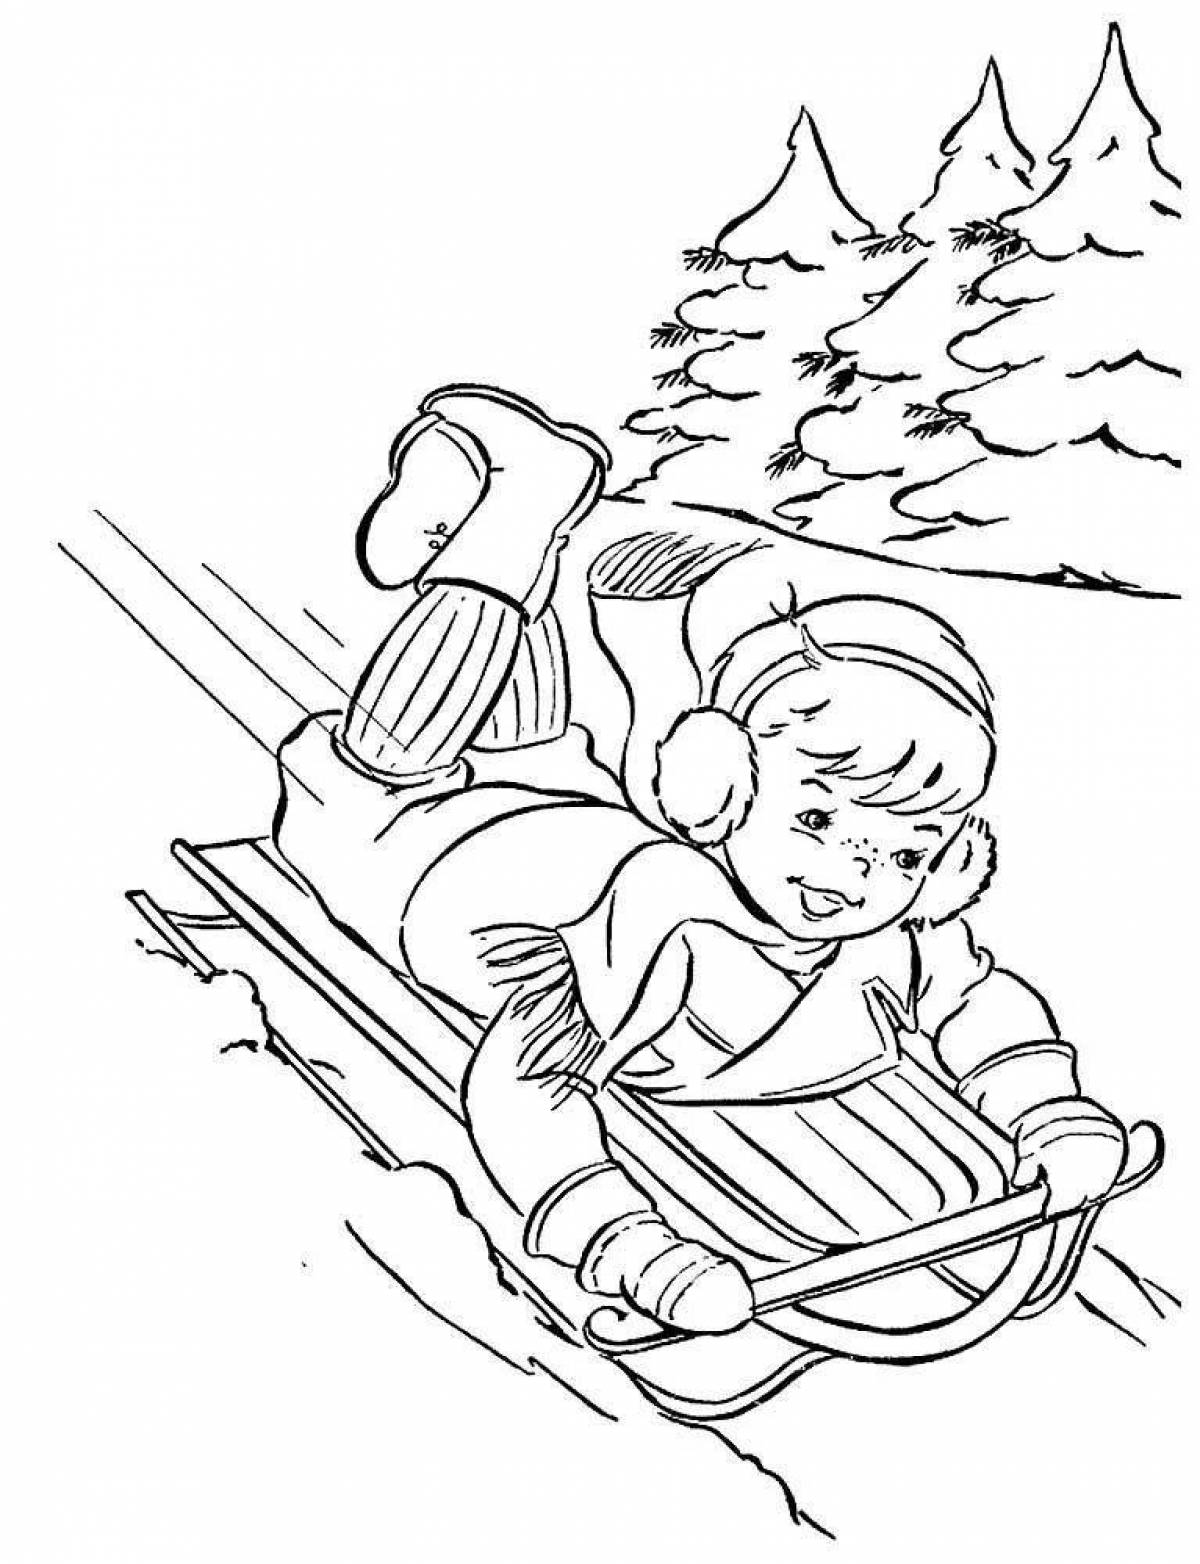 Coloring page blissful sledding